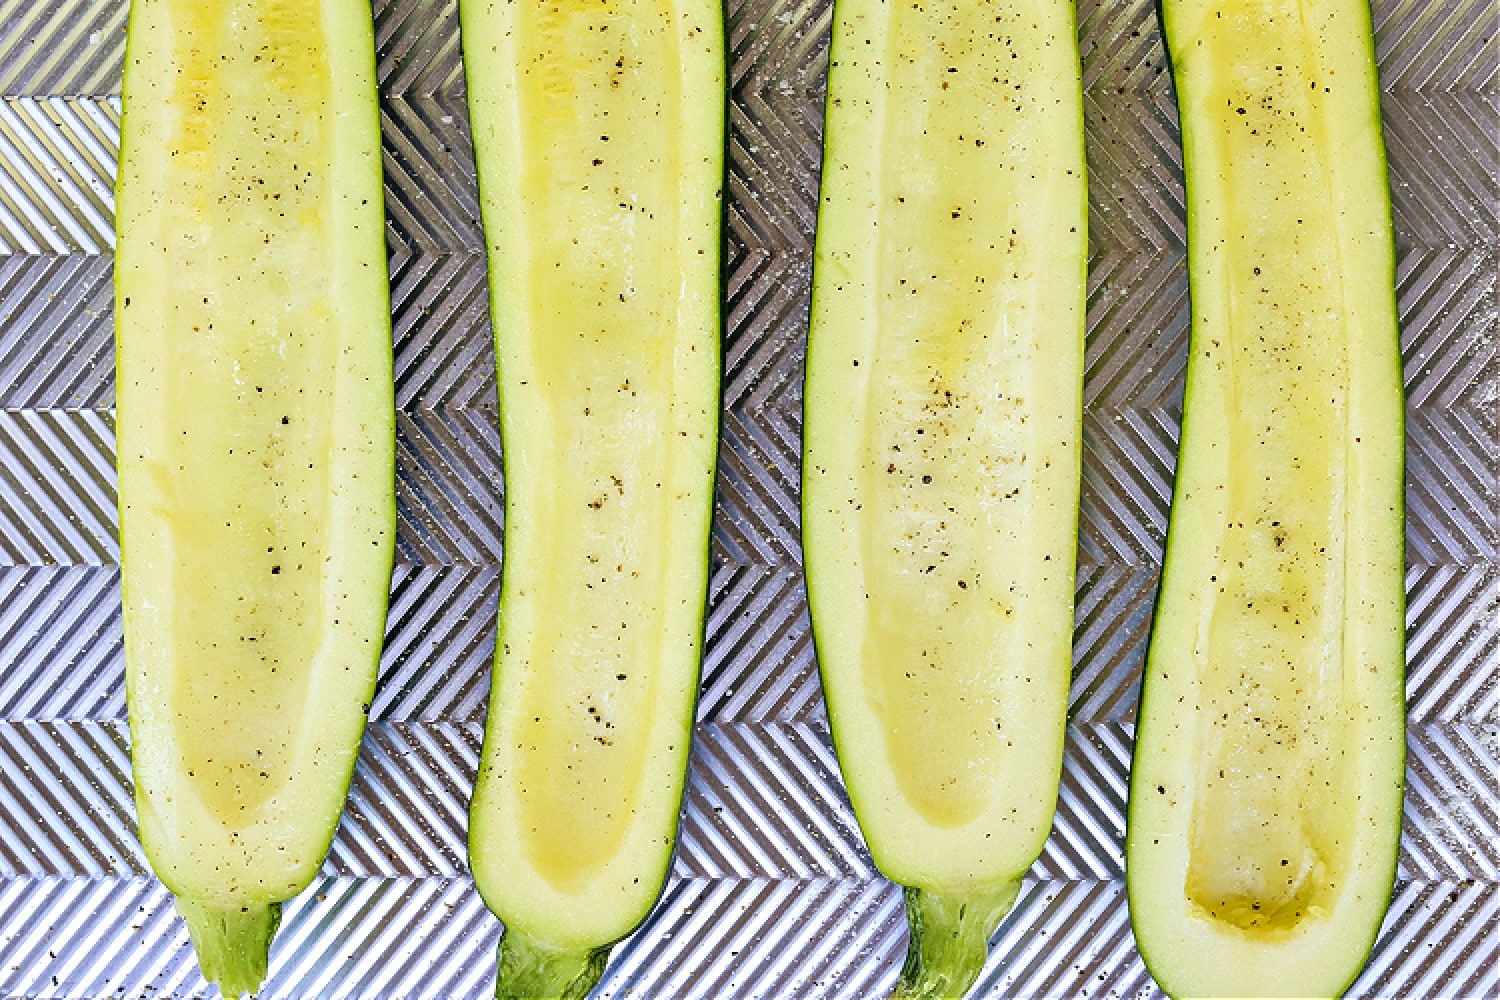 hallowed out zucchini halves